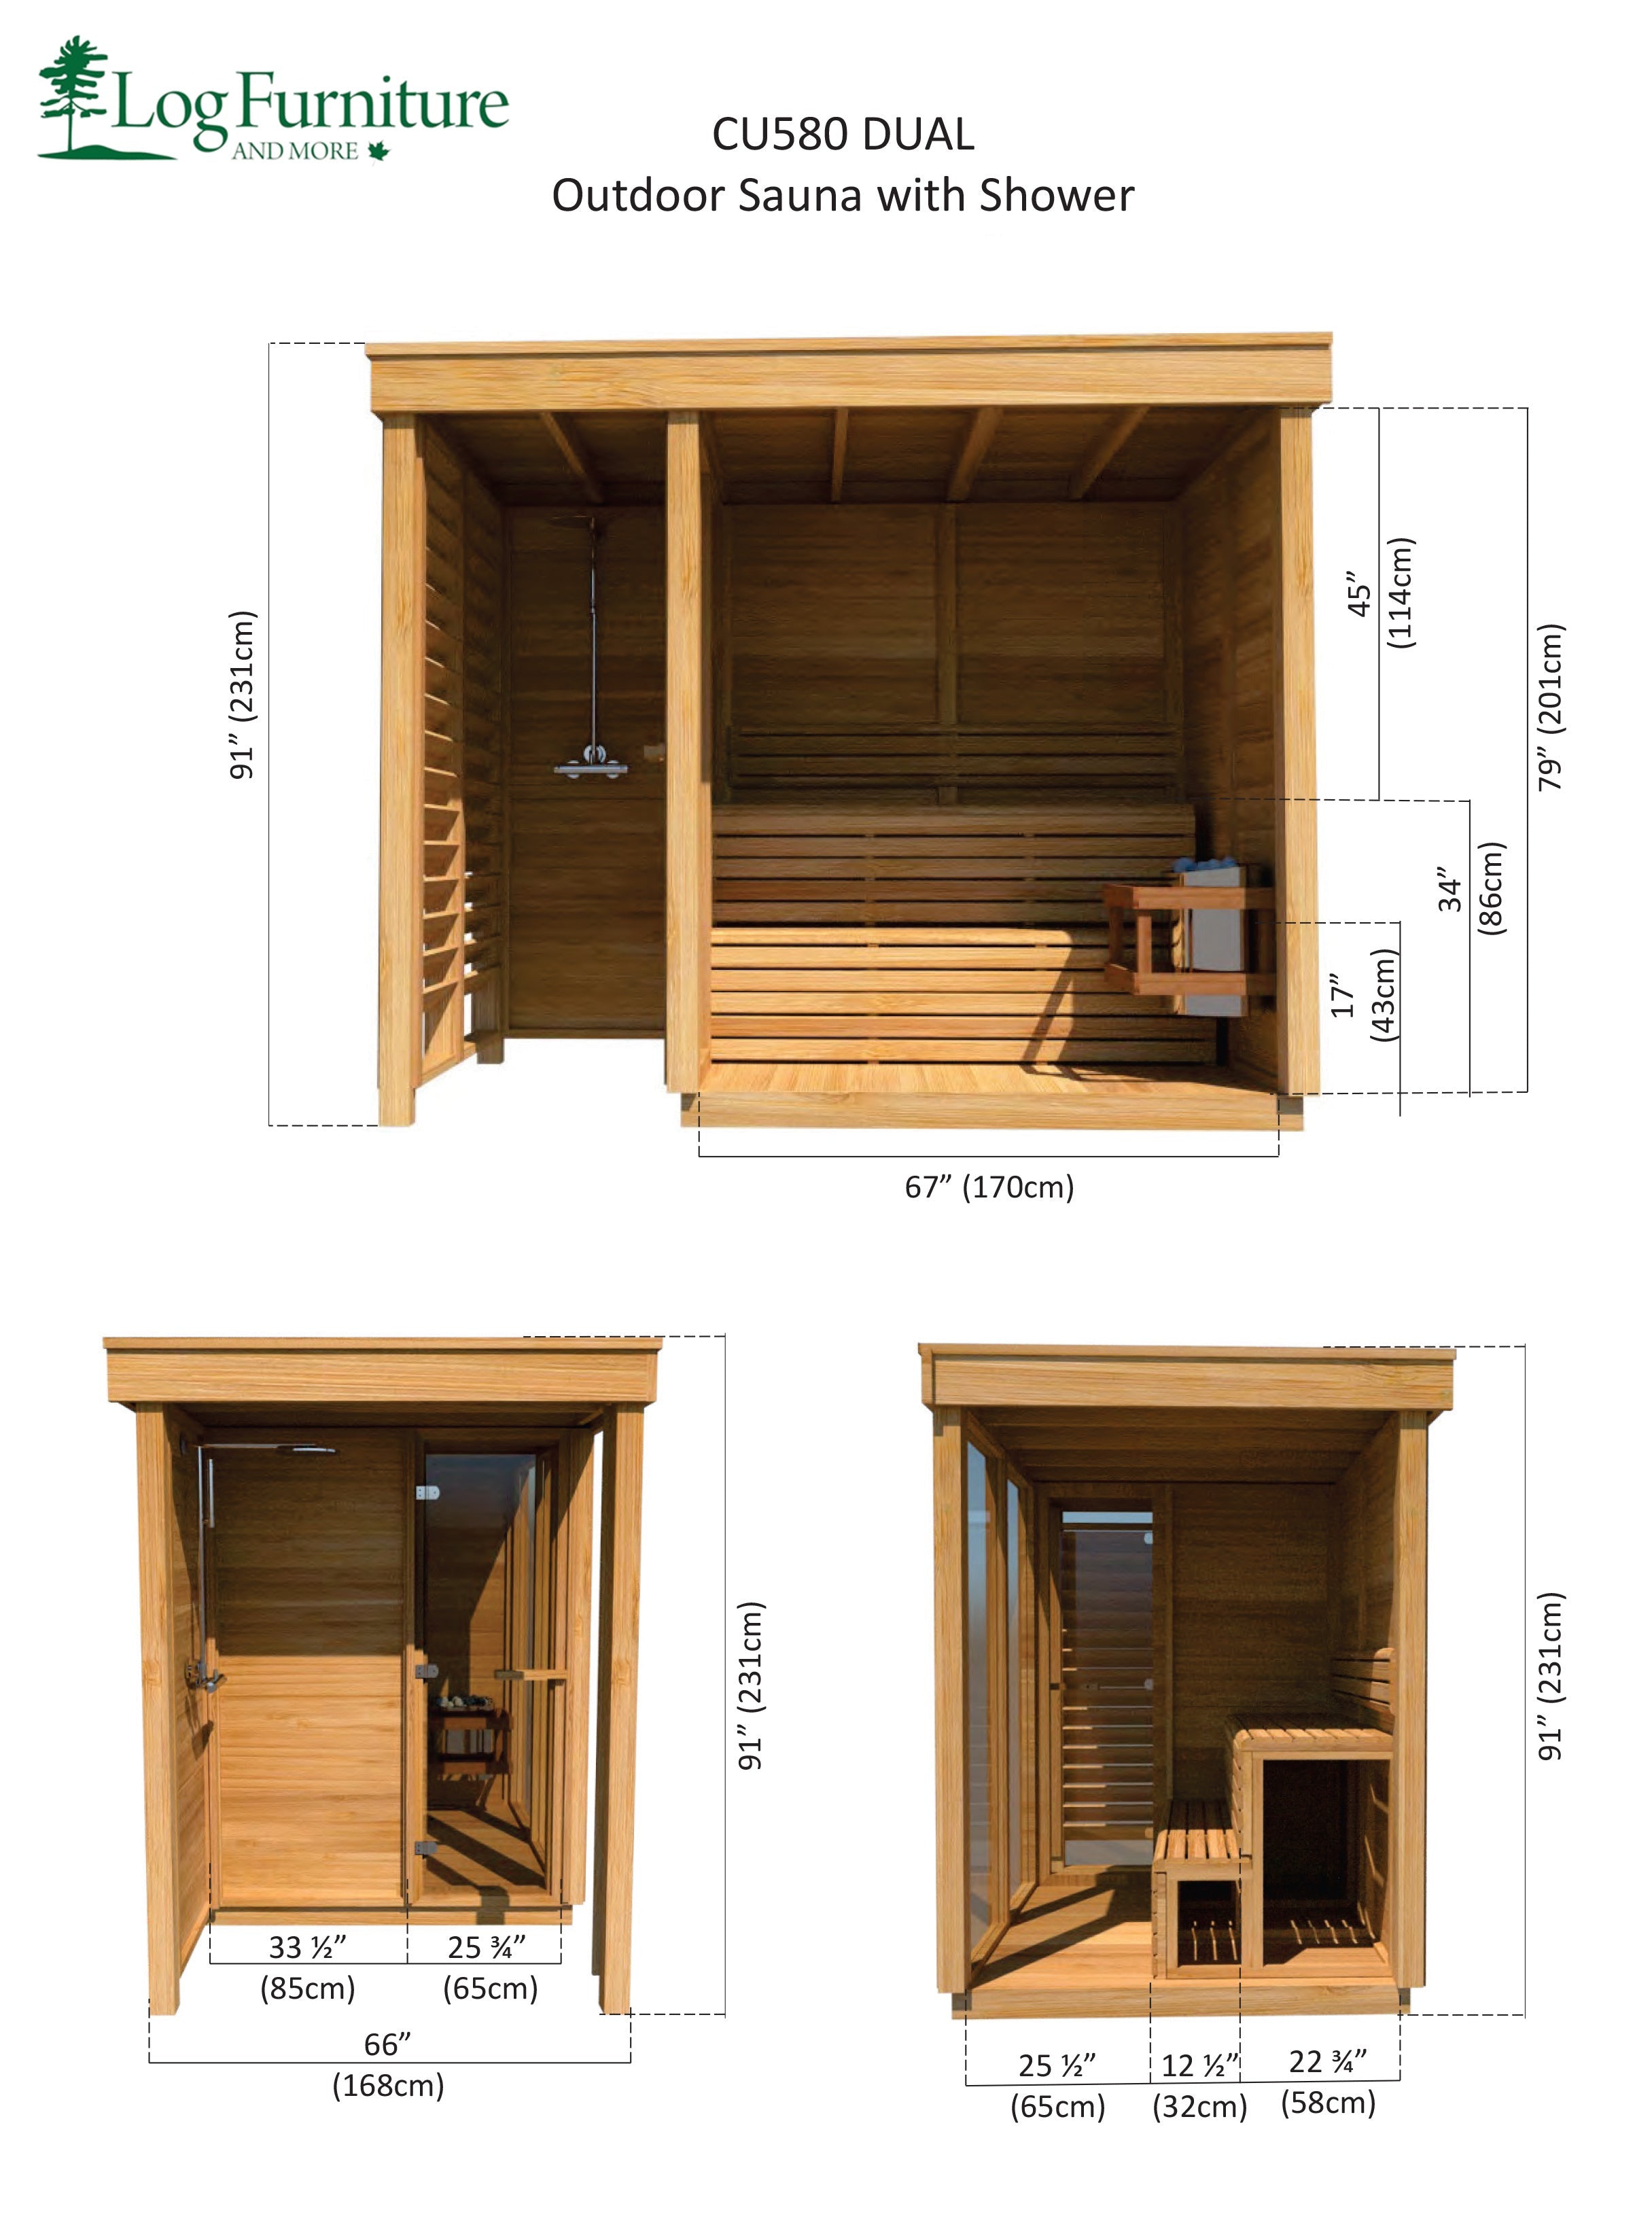 Modern Box Outdoor Sauna with Shower Dimensions 1/2